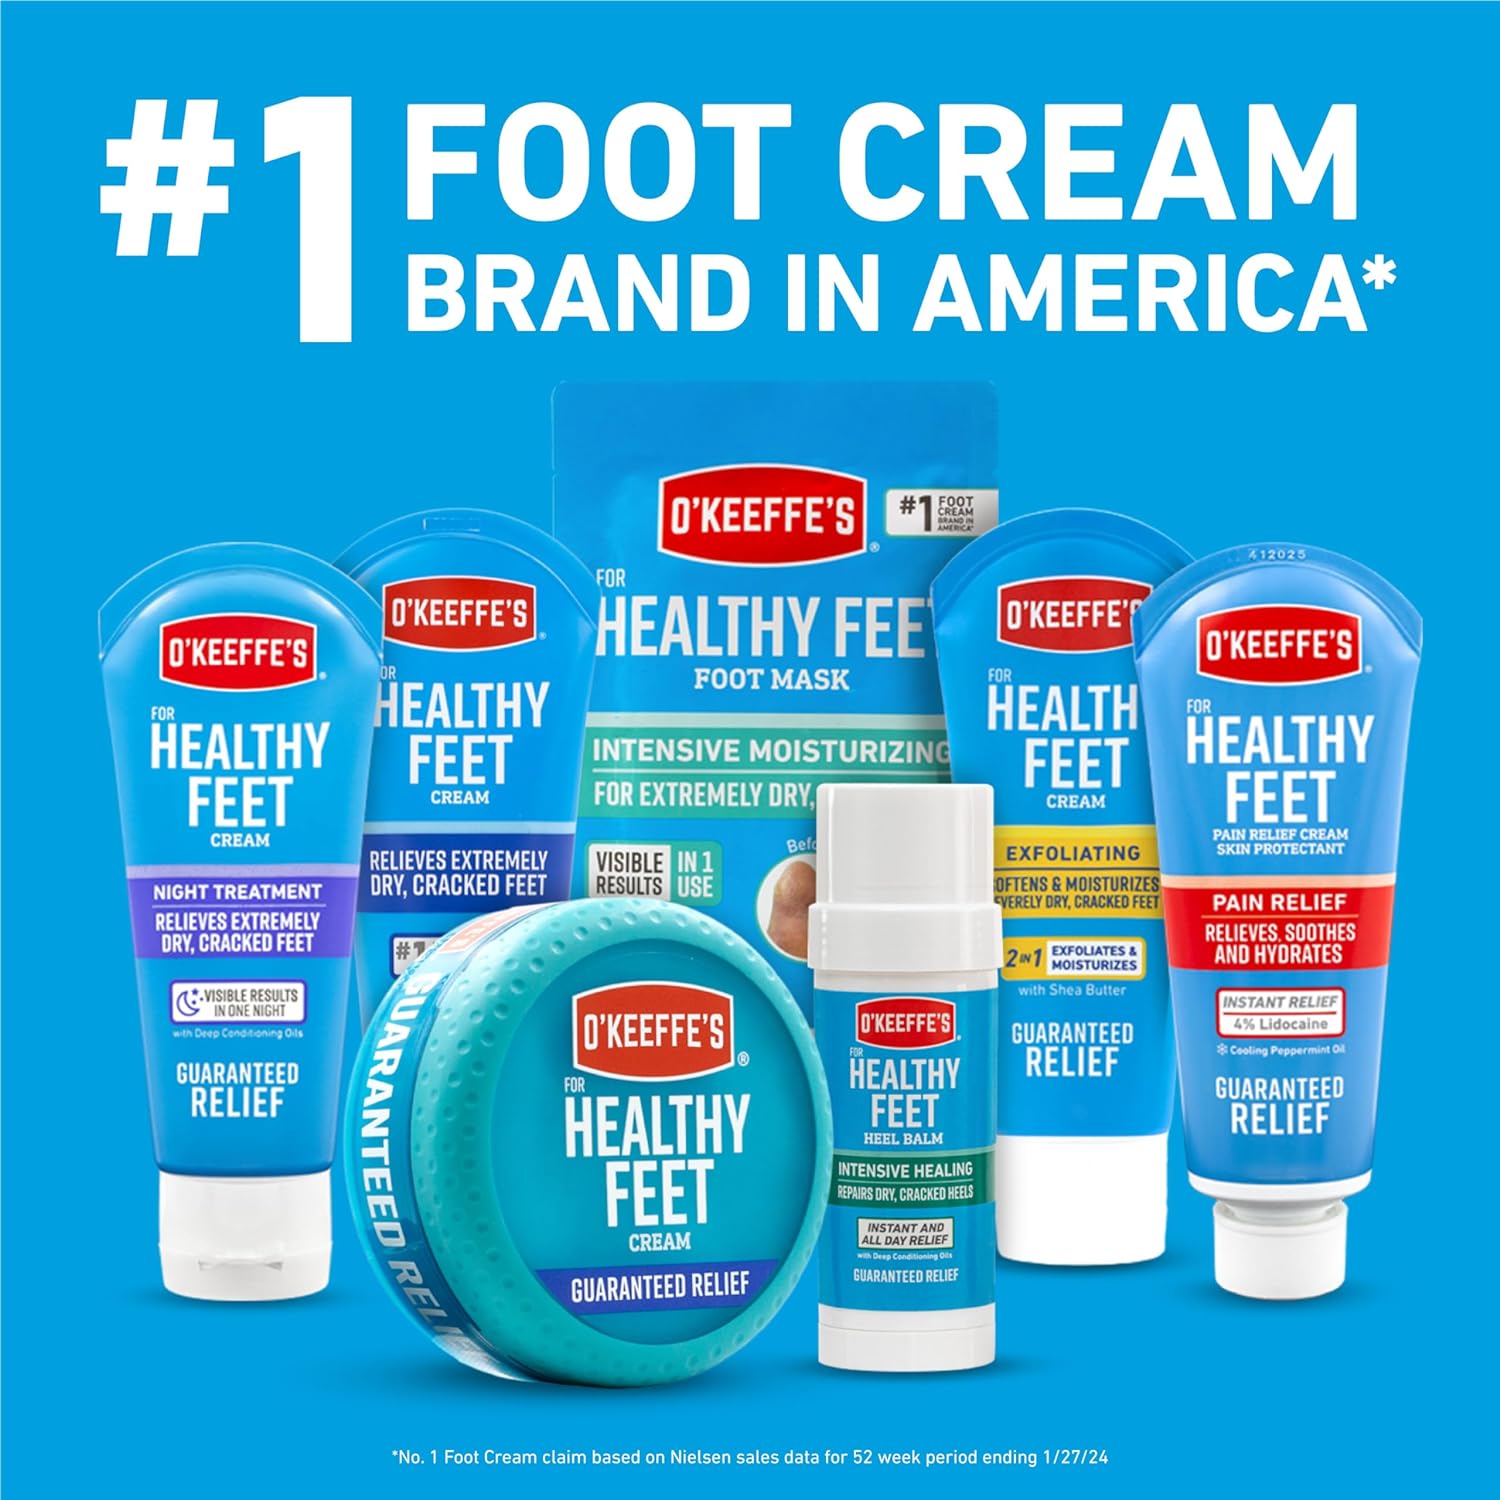 O'Keeffe's for Healthy Feet Intensive Healing Balm, Guaranteed Relief for Extremely Dry, Cracked Feet, Heel Balm that Instantly Fills Dry, Cracked Heels, 2.2oz Balm Stick, (Pack of 1) : Beauty & Personal Care